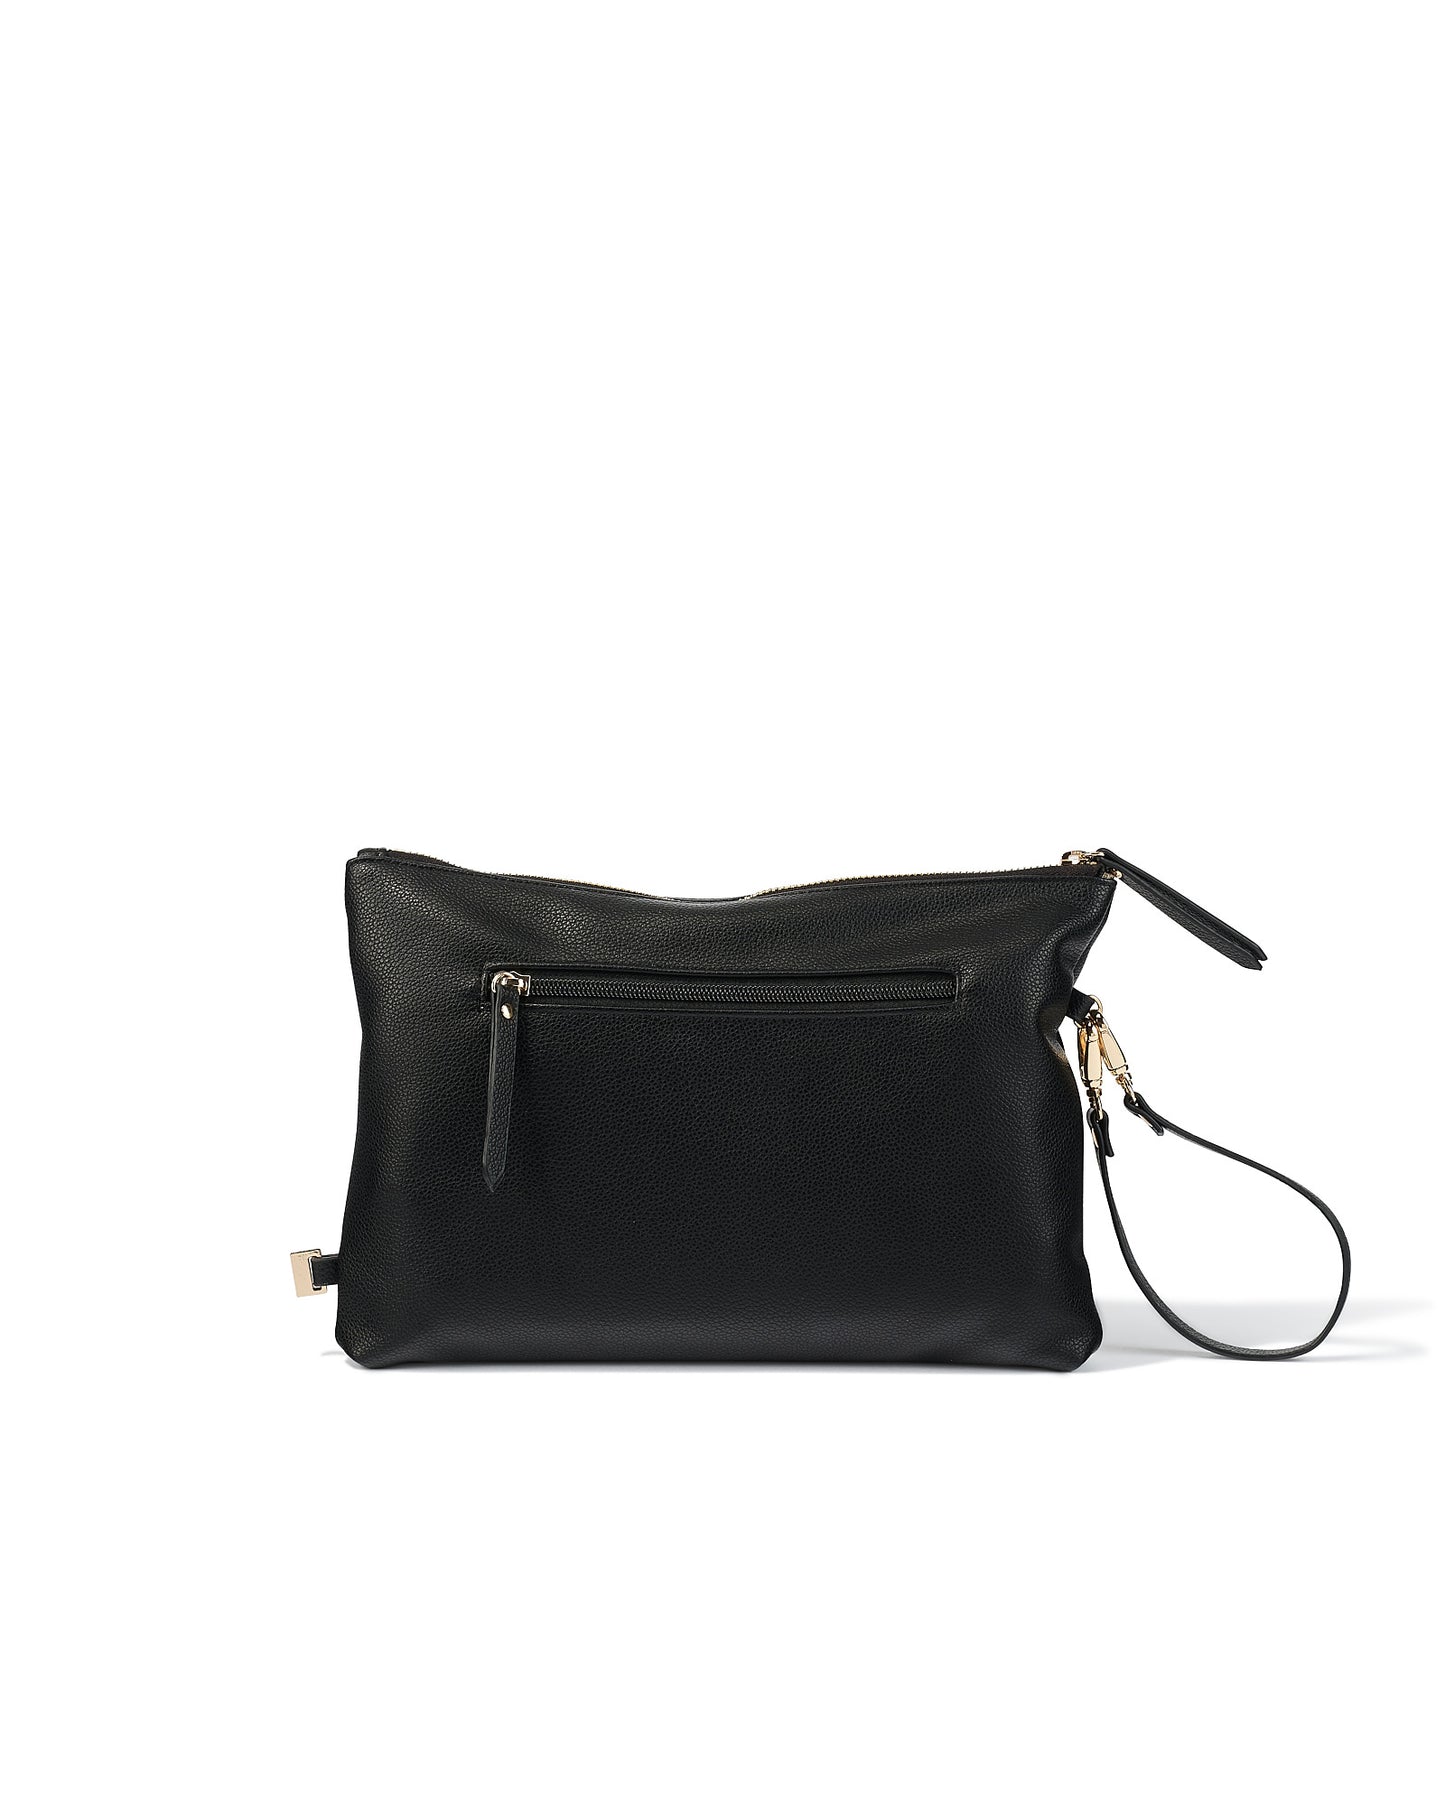 OiOi Nappy Changing Pouch Black Vegan Leather